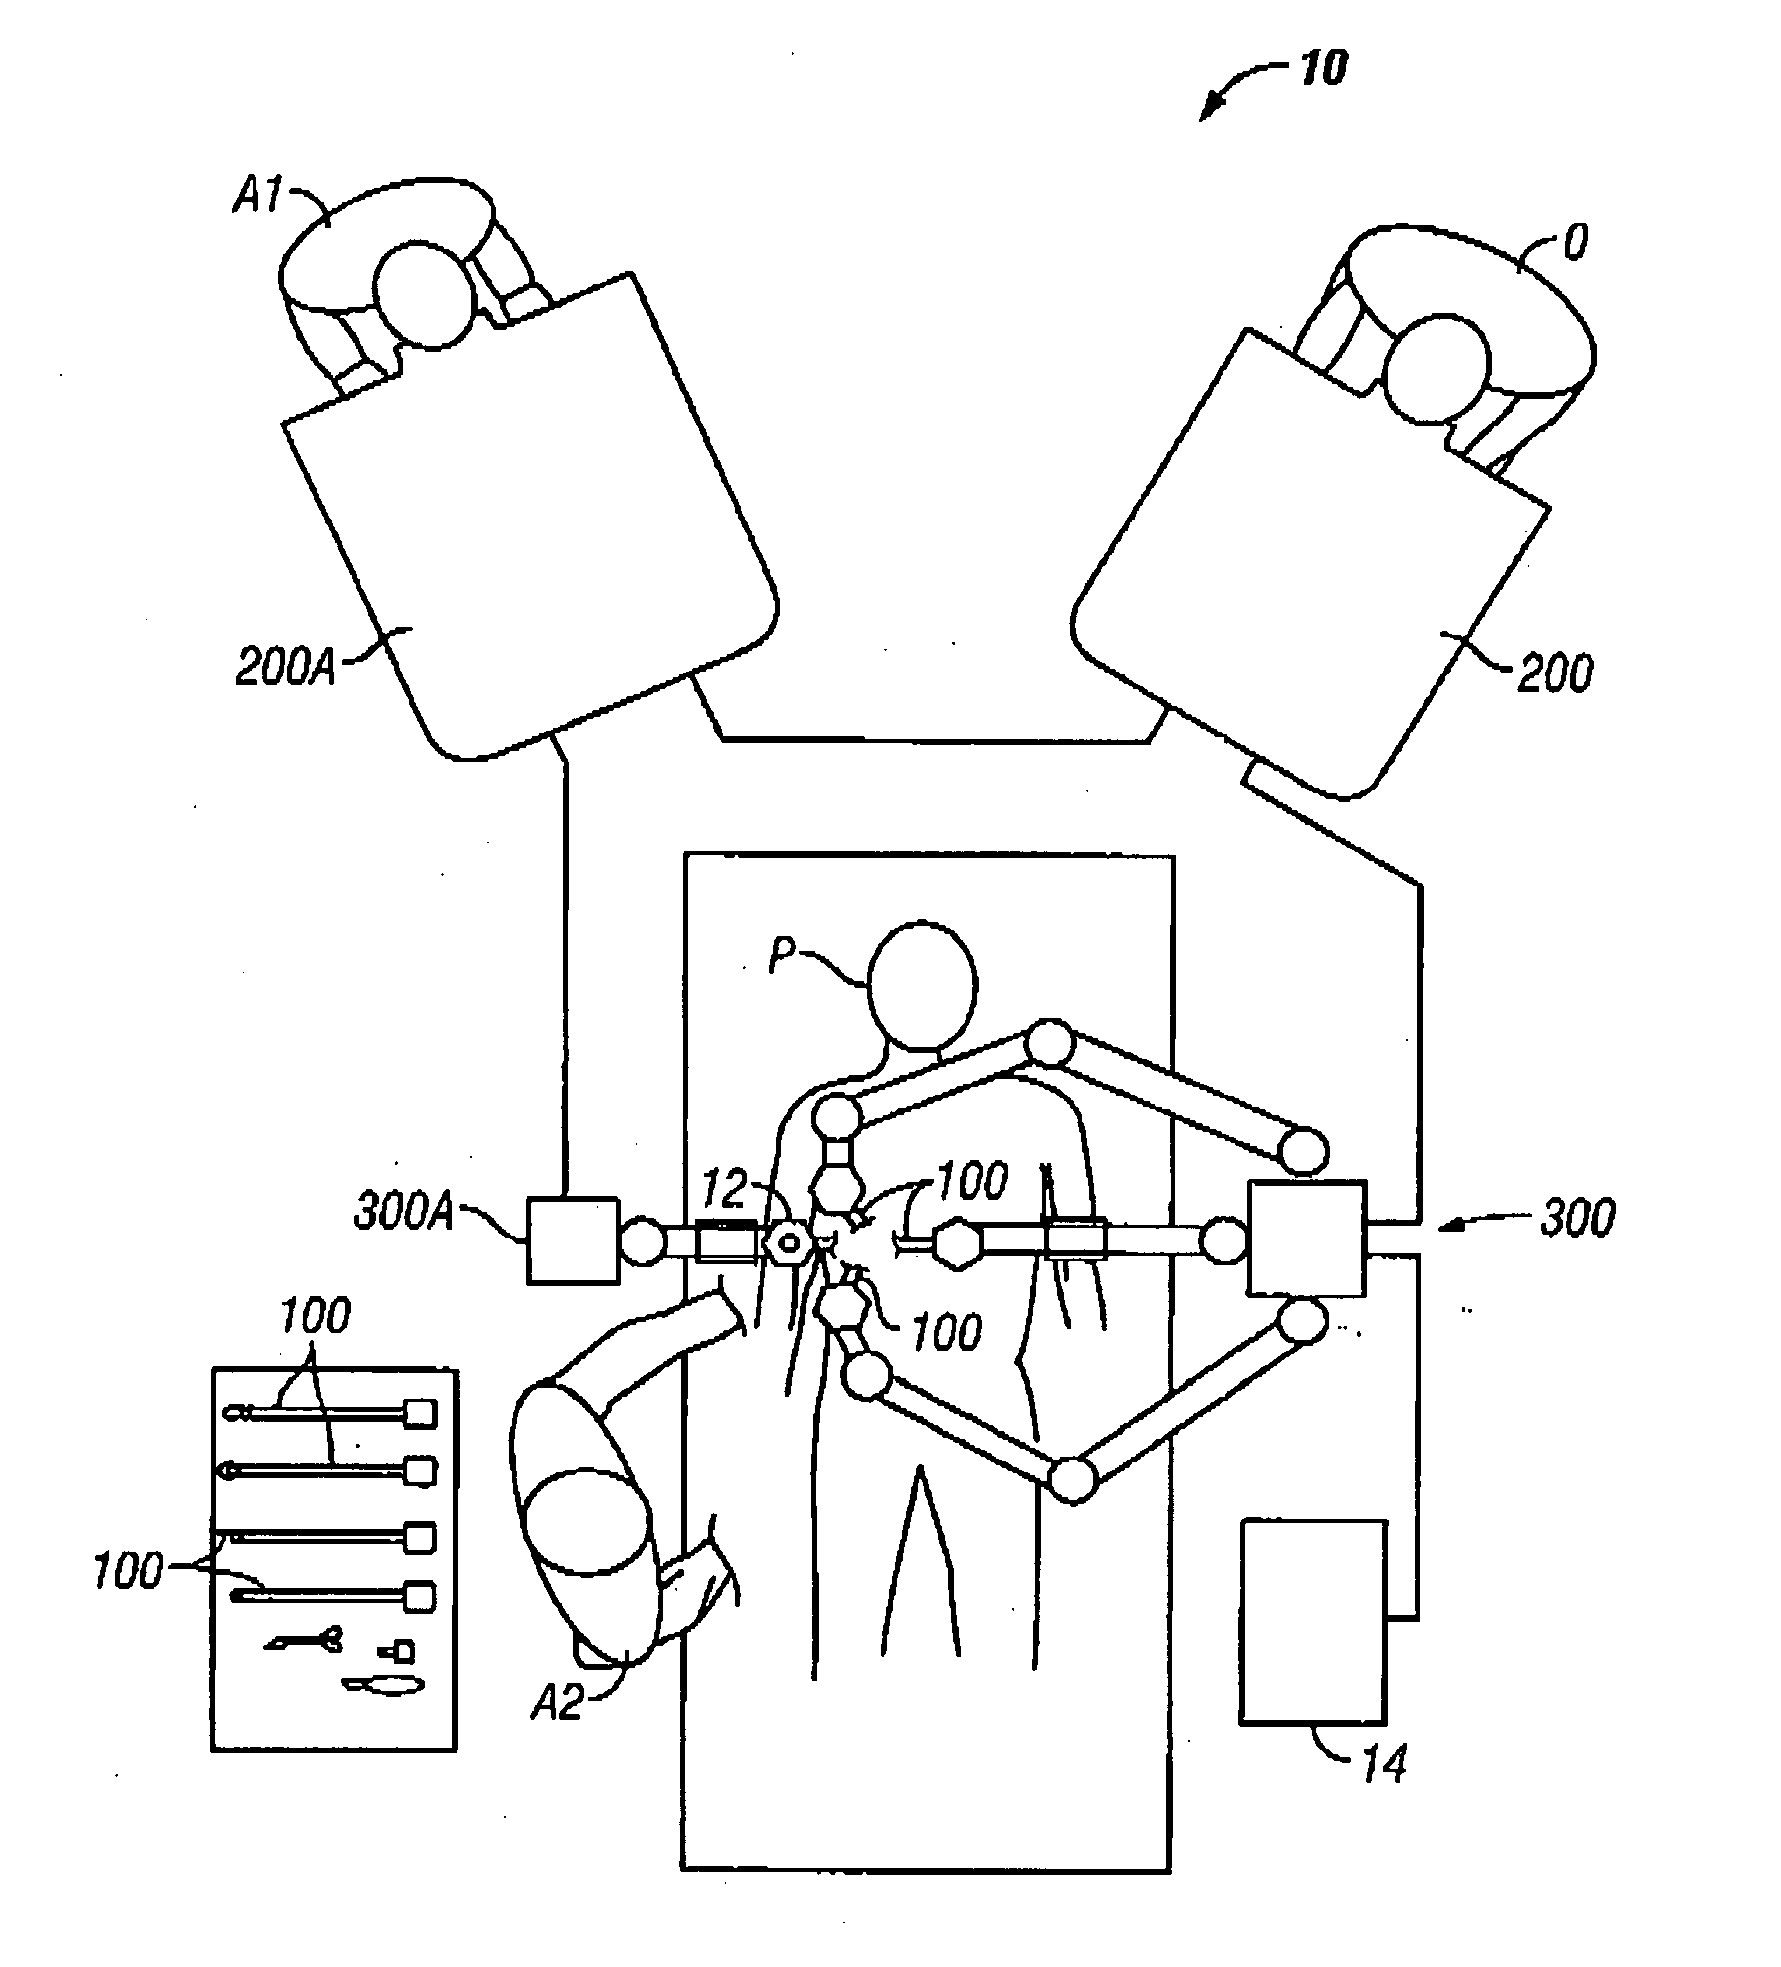 Methods and apparatus for surgical planning